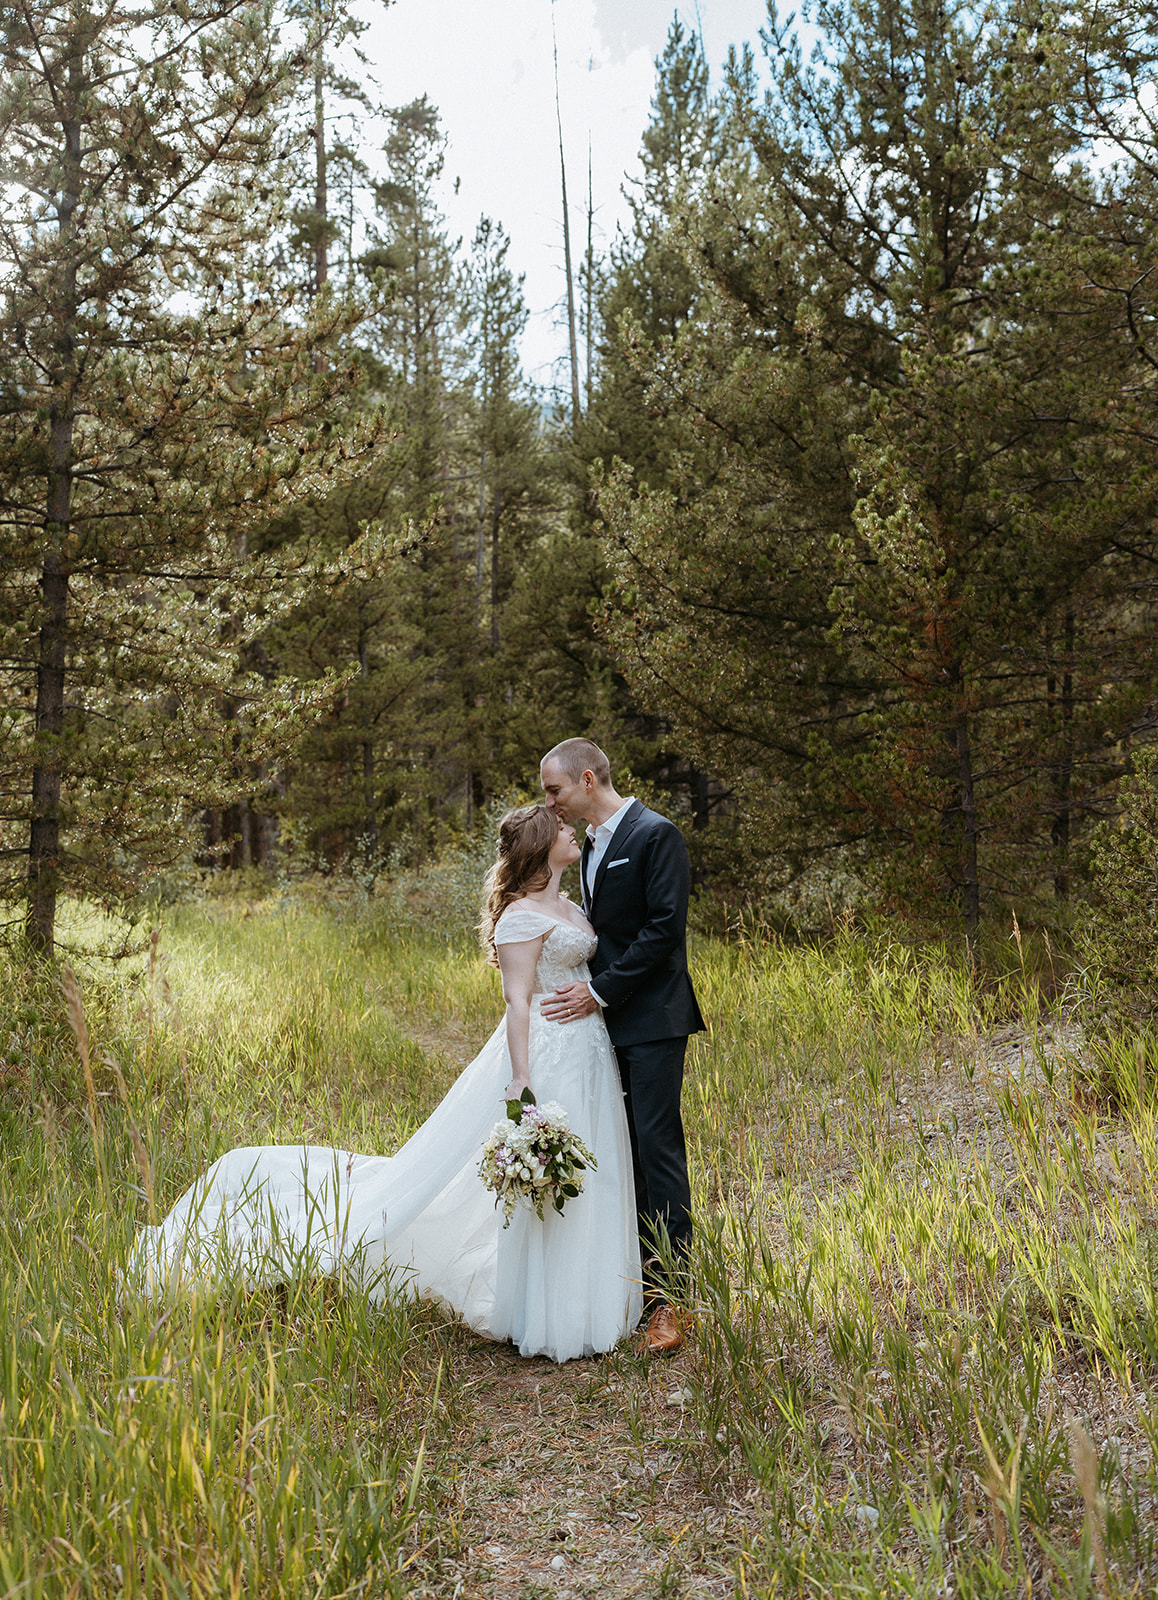 A groom kisses his bride's forehead as they stand in a grassy mountain trail